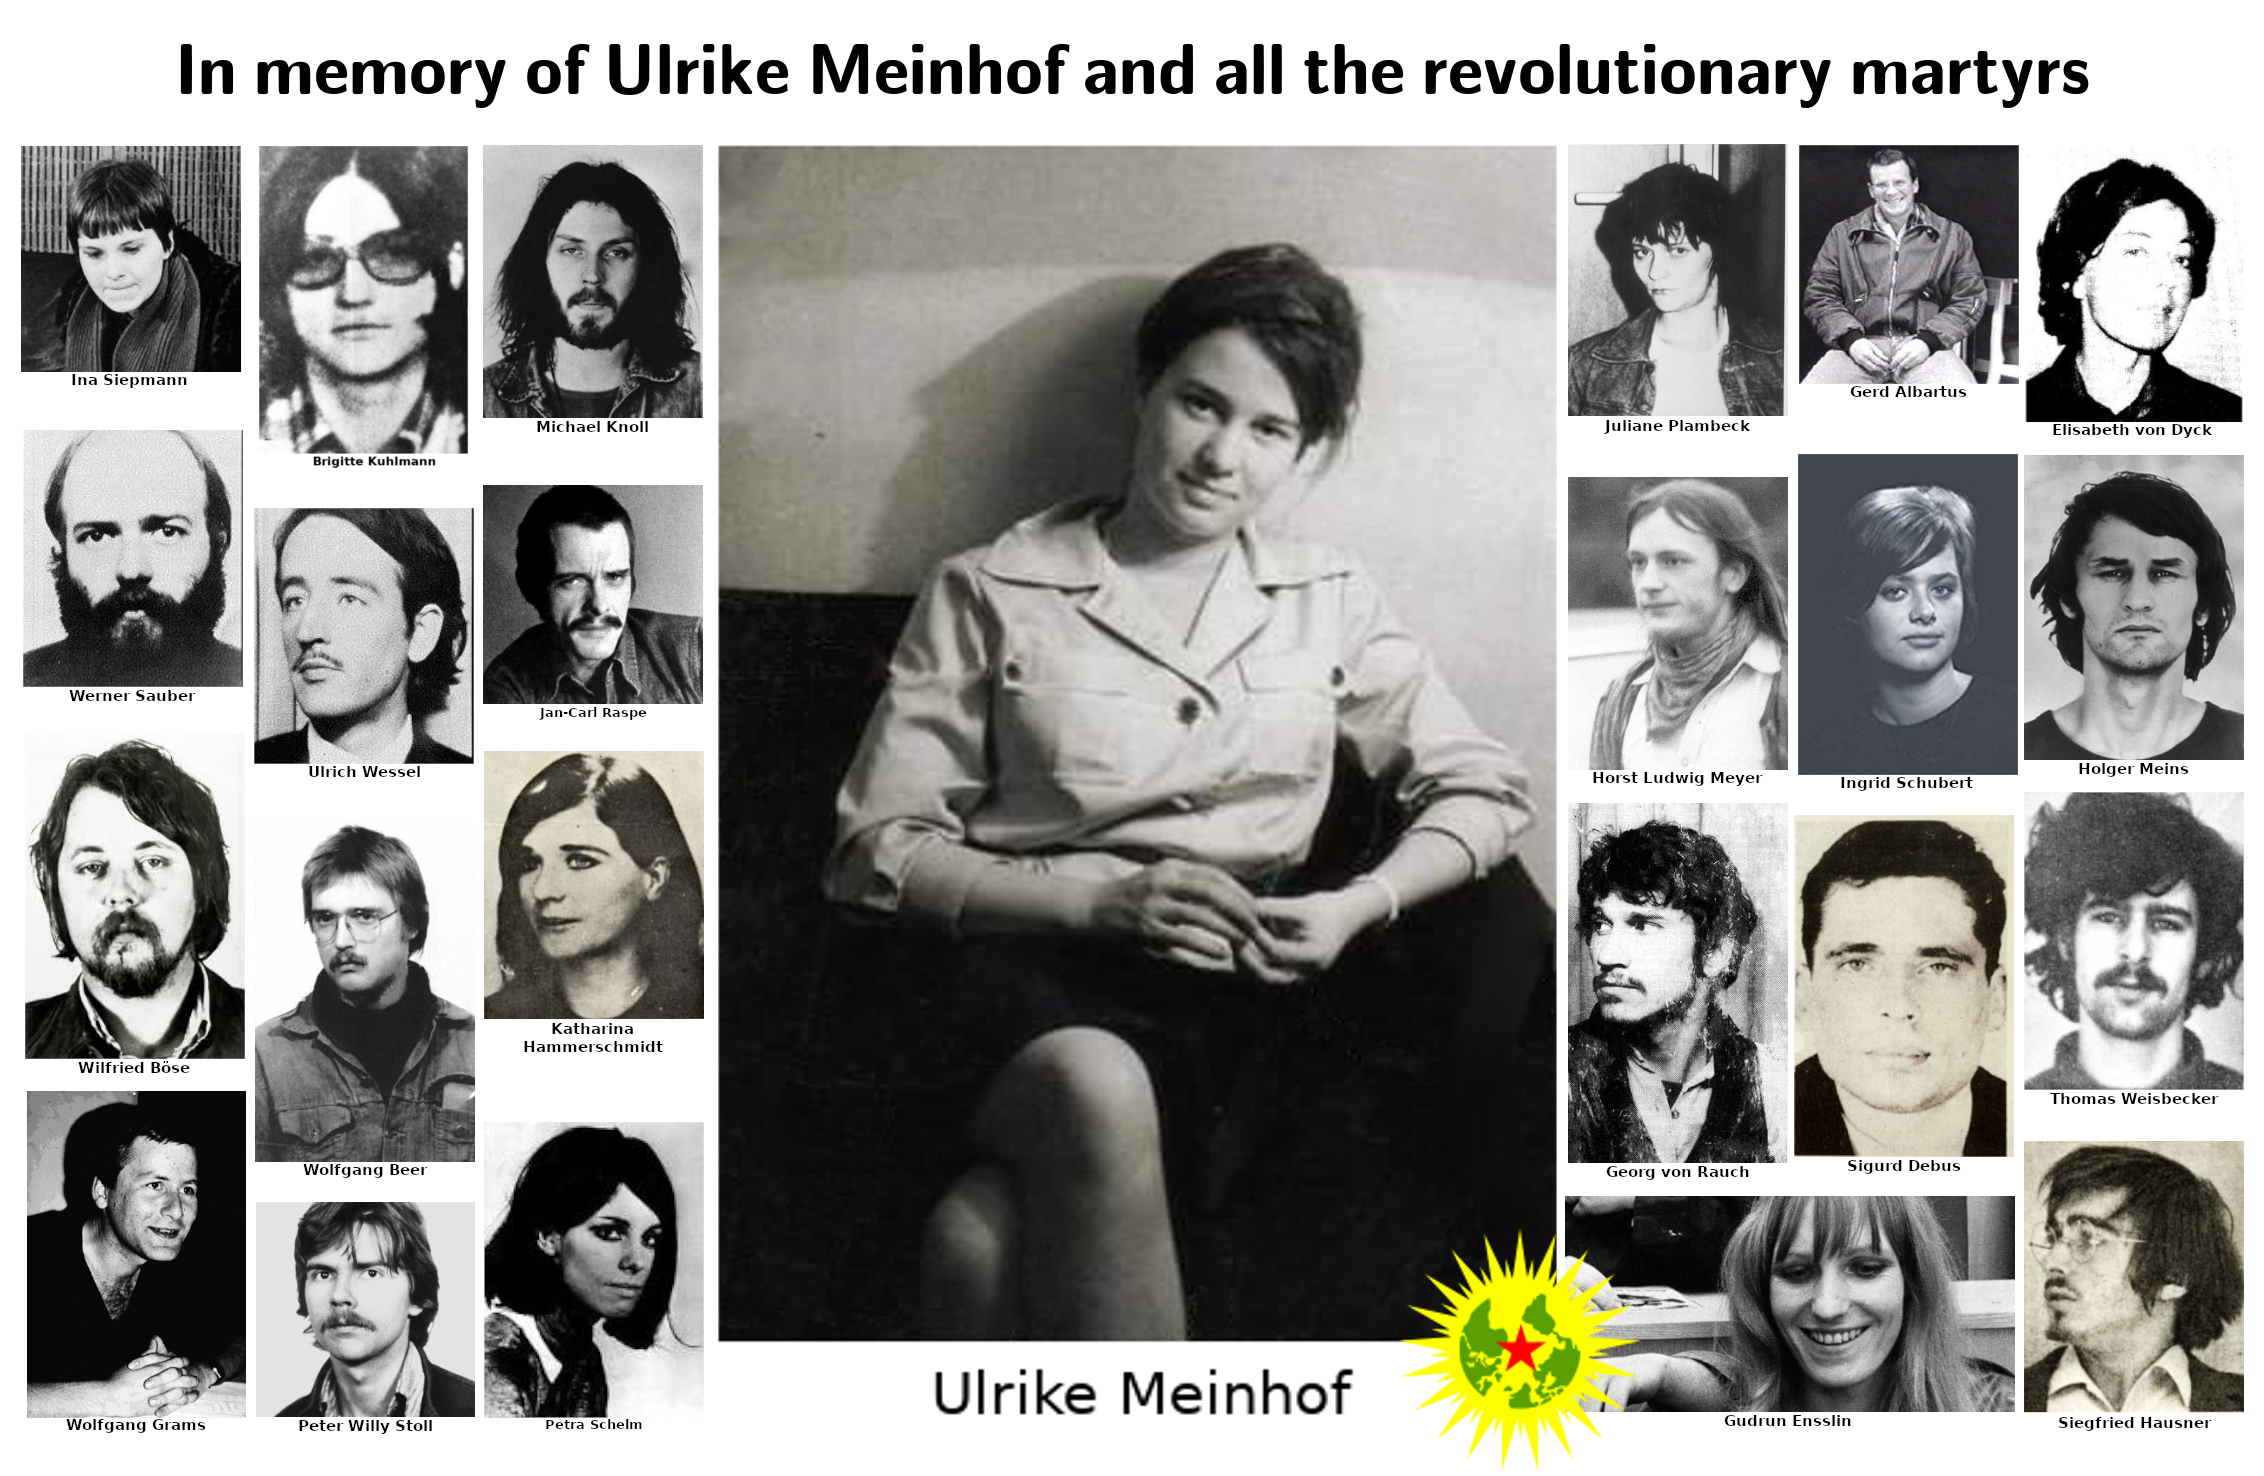 I. “Remembering means fighting” – the day of Ulrike Meinhof’s death